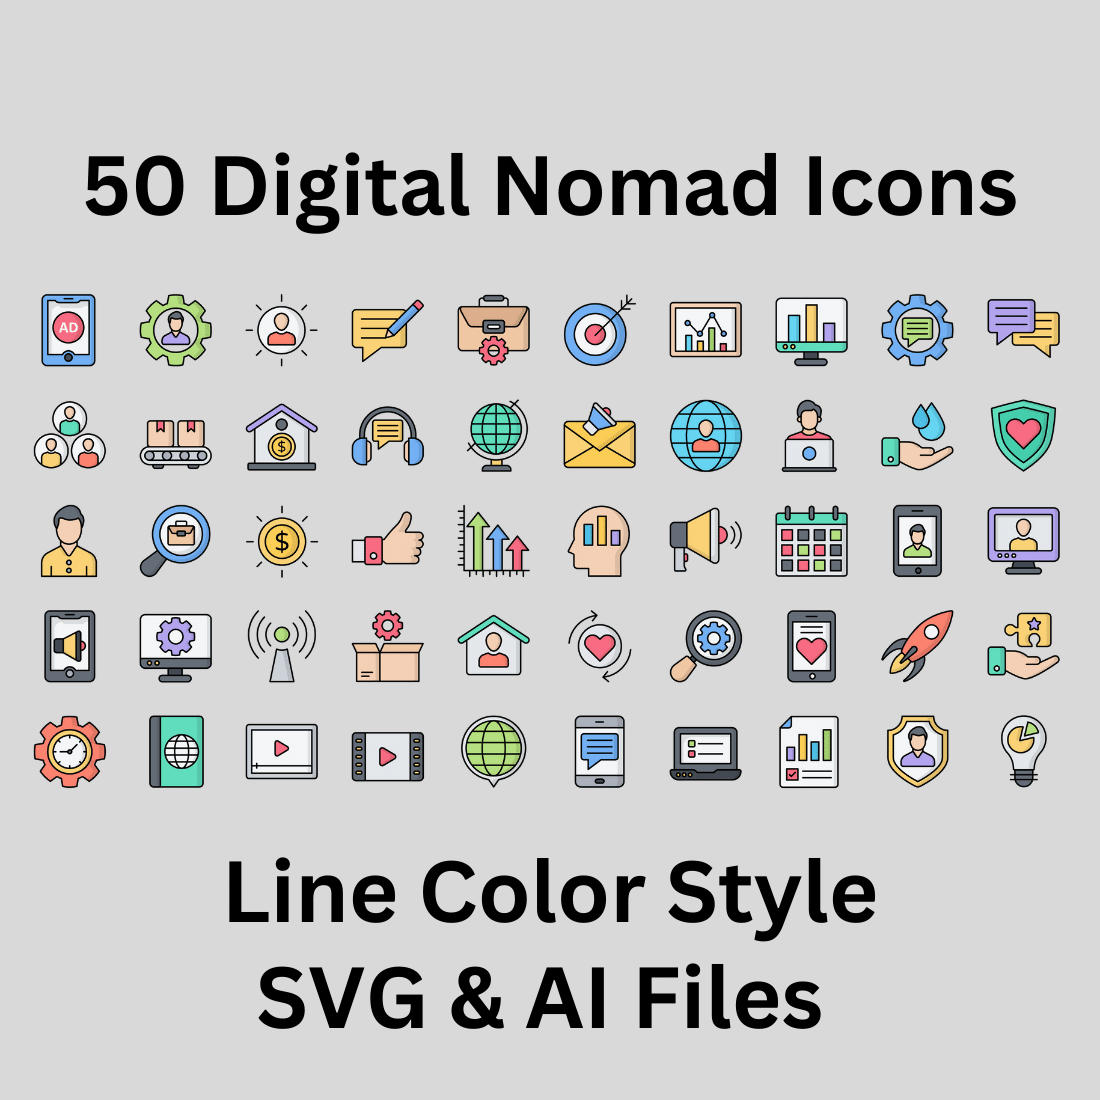 Digital Nomad Icon Set 50 Line Color Icons - SVG And AI Files preview image.